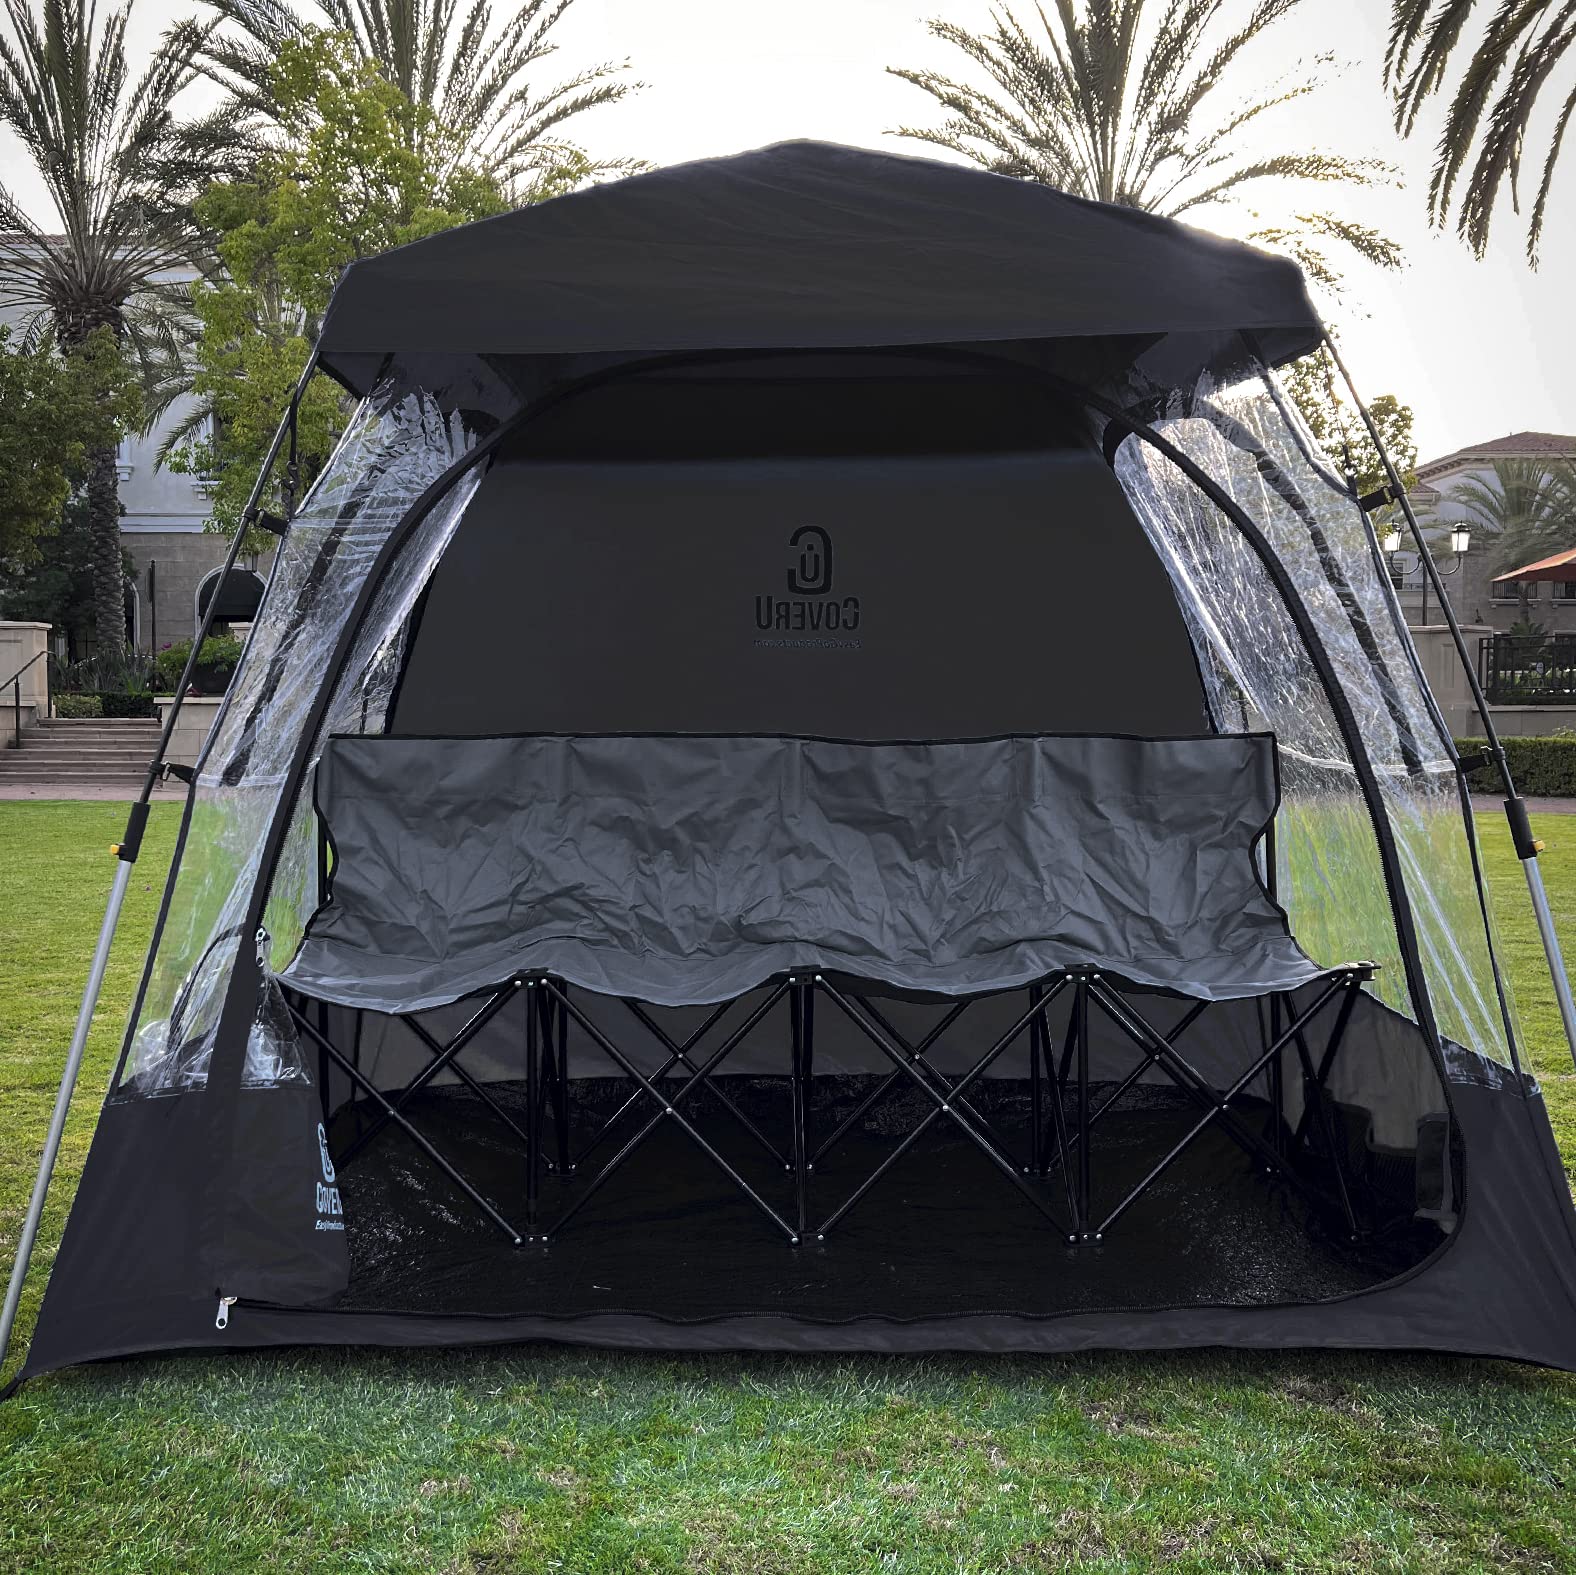 CoverU Sports Tent Pod For 3-4 People - RAIN or Sun Protection – NEW Large Pop Up Climate Canopy Shelter – Soccer, Football, Softball & Other Sporting Events and Parades - Patented and Patents Pending